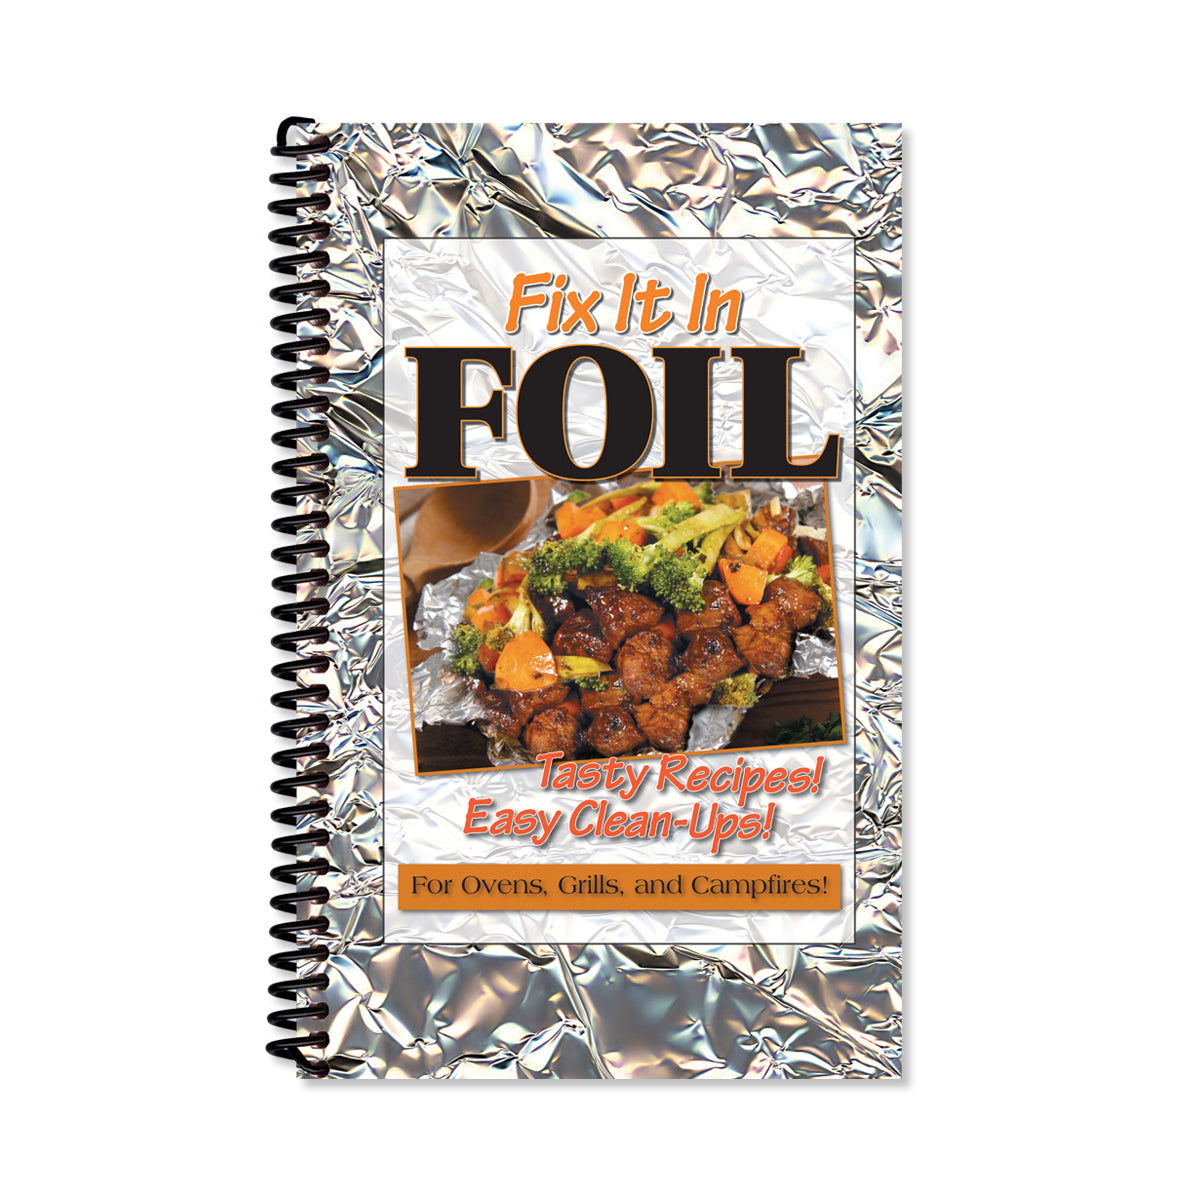 Front cover of Fix it in Foil. Tasty recipes! Easy clean-ups!